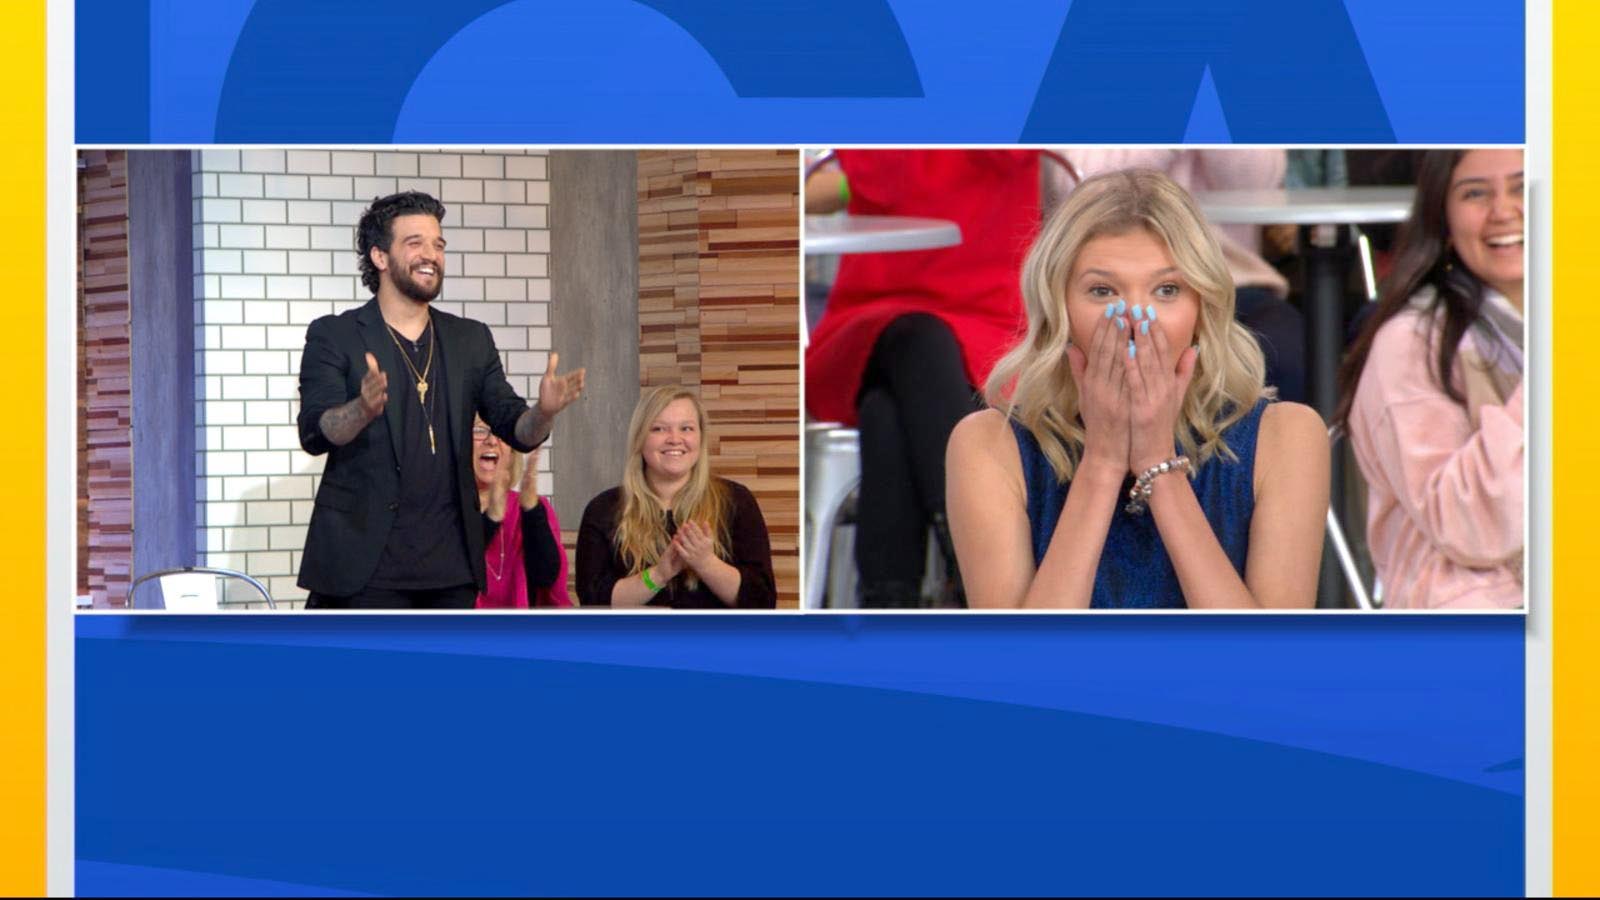 PHOTO: Anastasia Machenko, 17, is surprised by "Dancing With the Stars" pro Mark Ballas on "Good Morning America."